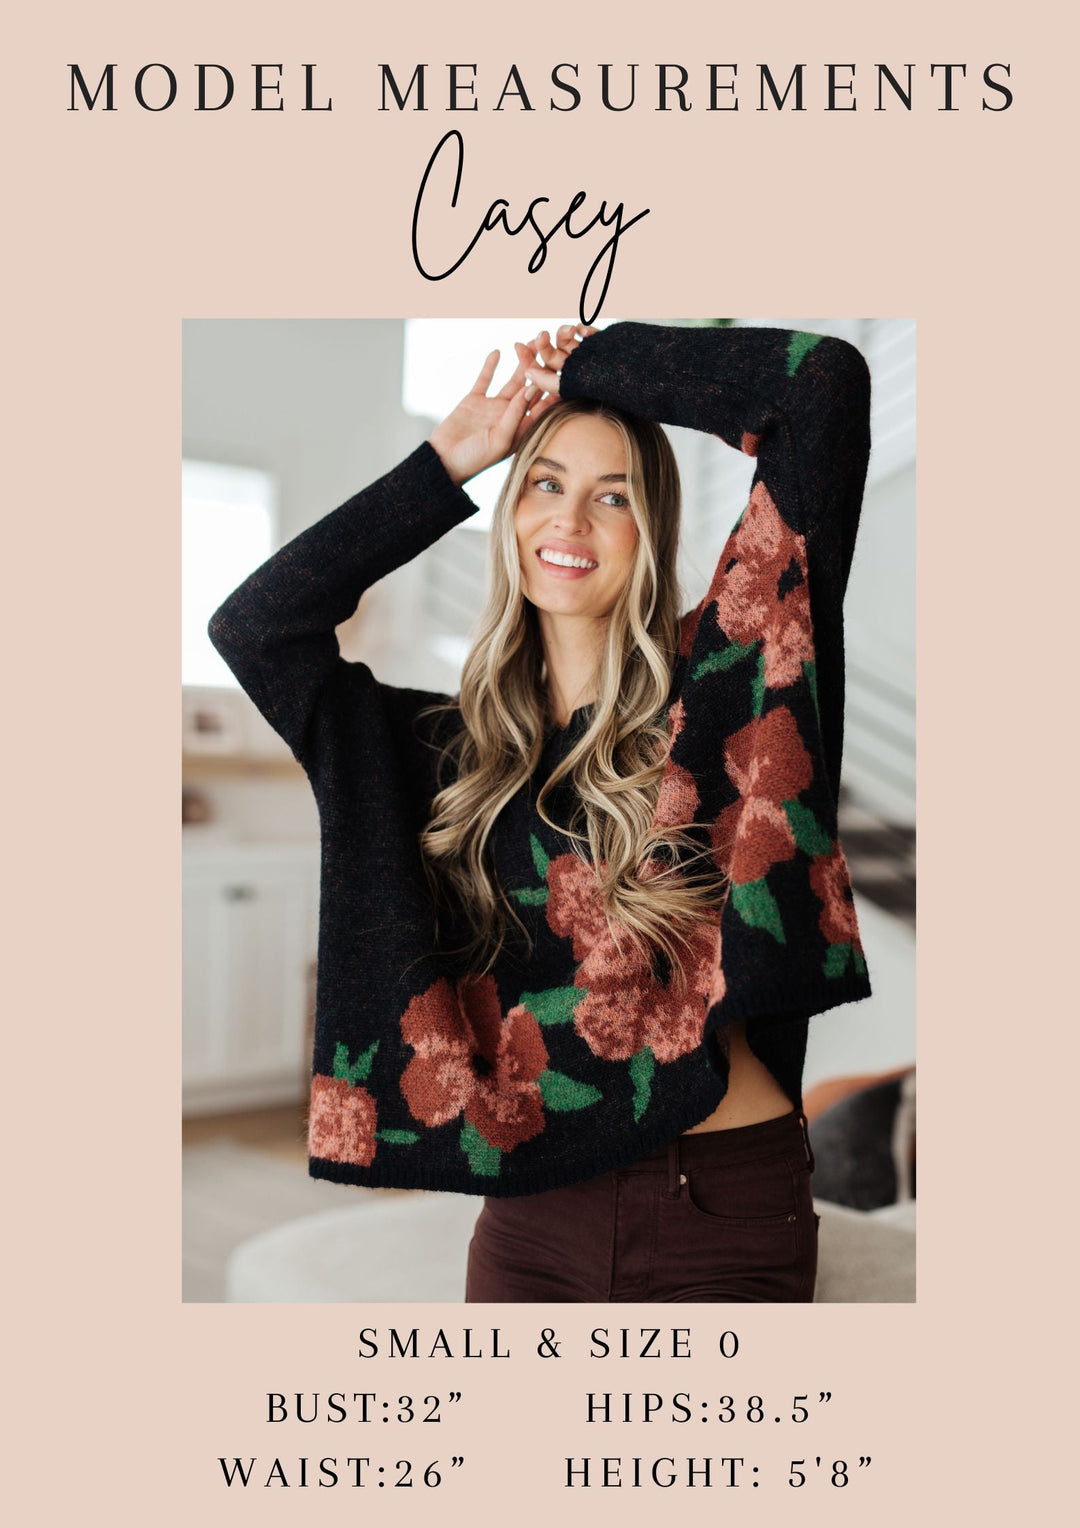 Dear Scarlett Essential Blouse in Royal and Pink Floral